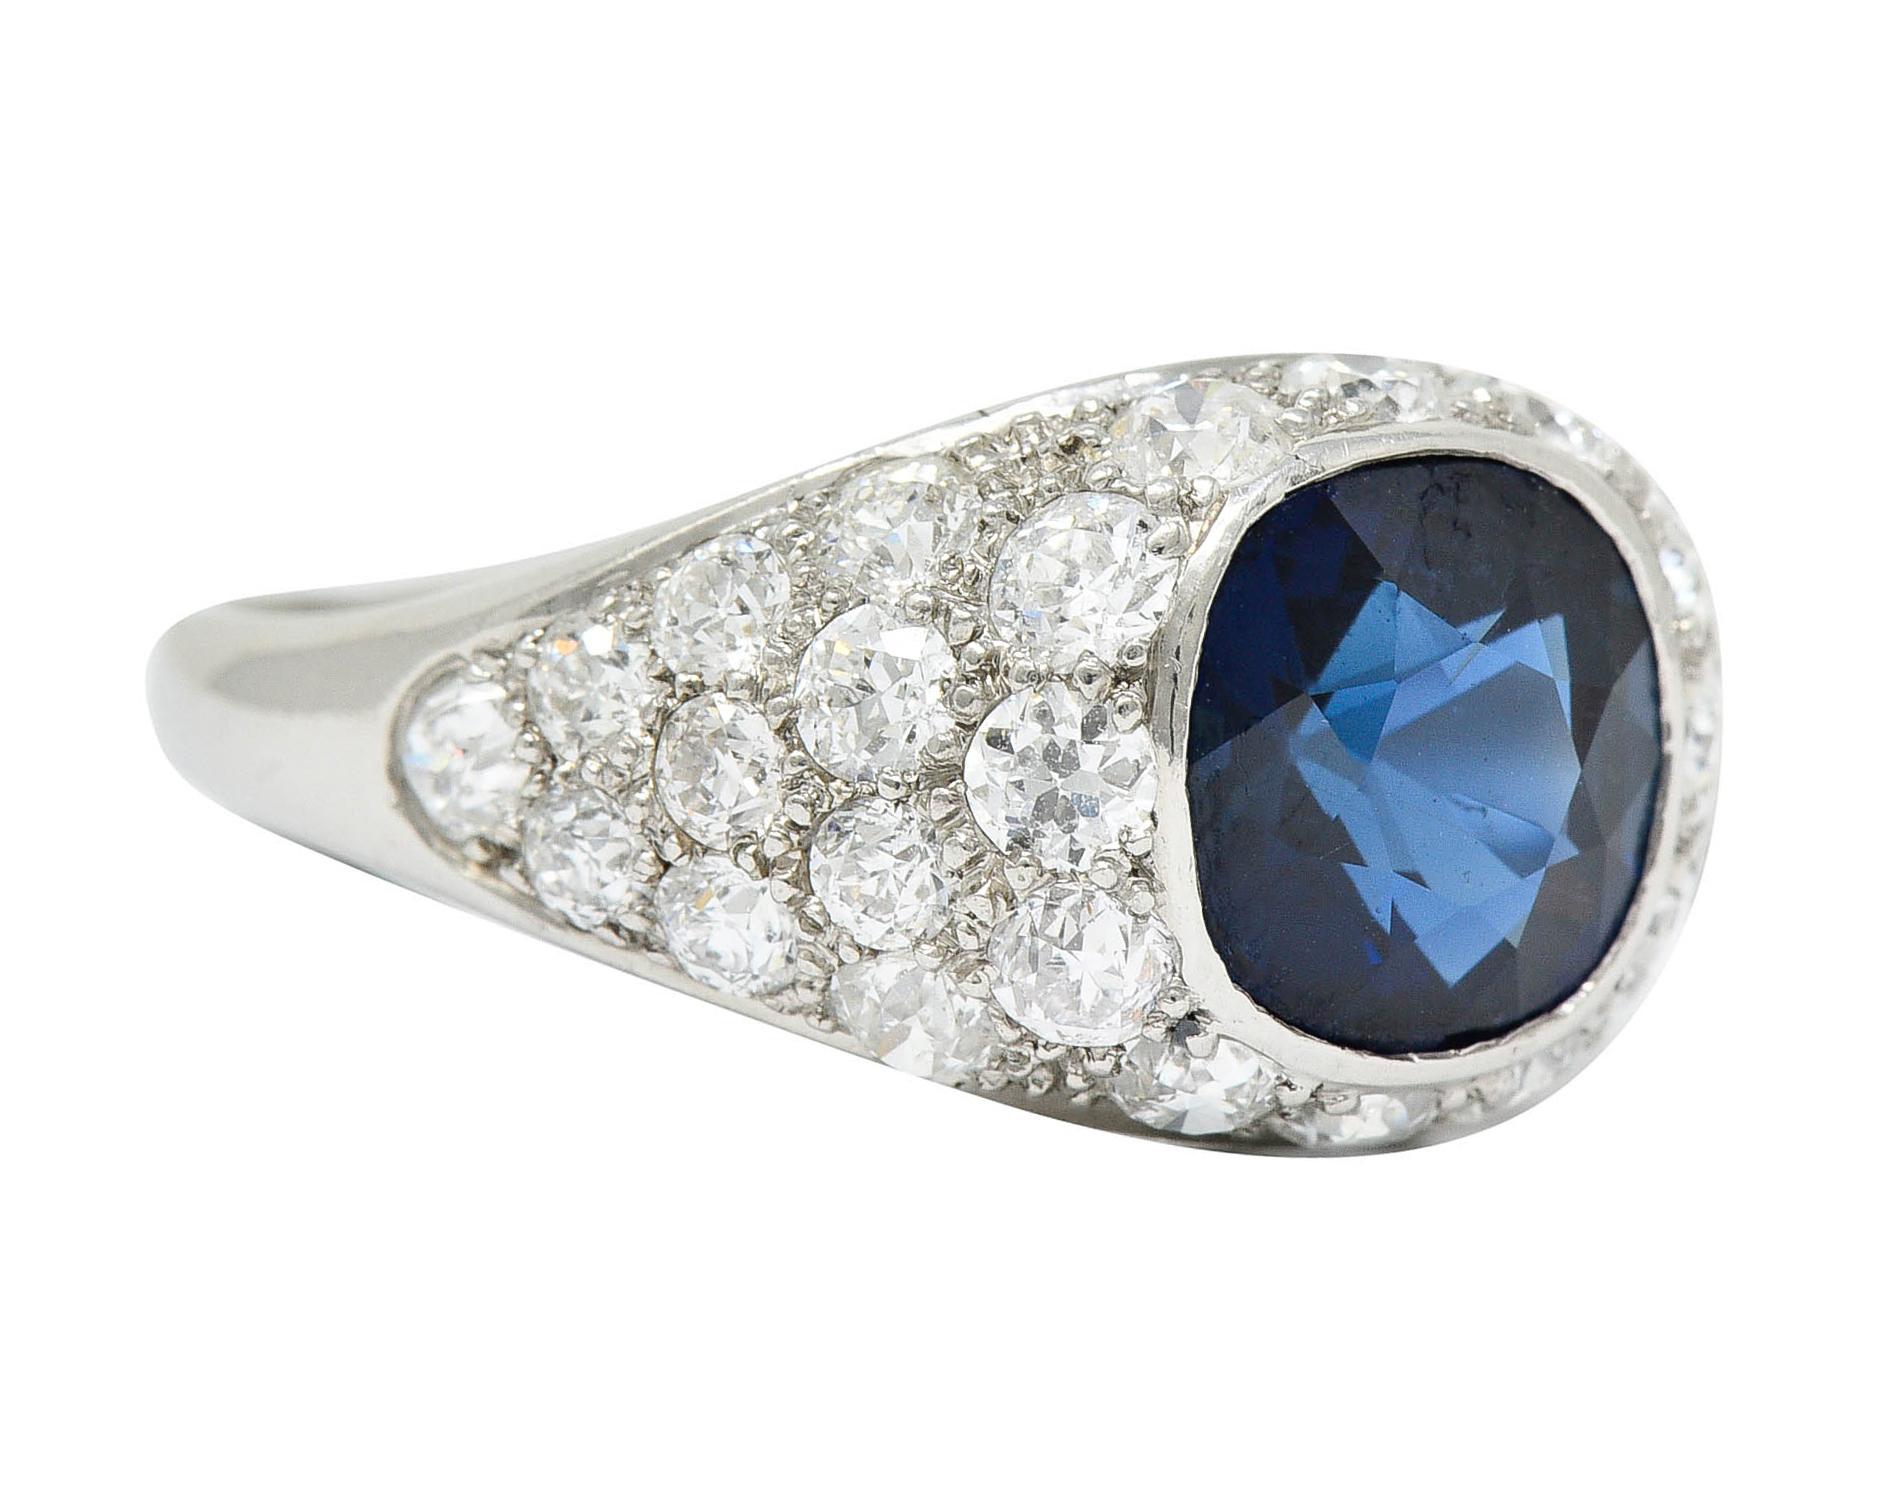 Centering a bezel set cushion cut sapphire weighing approximately 2.84 carats

Transparent medium-dark blue with no indications of heat and Cambodian in origin
Surrounded by pavè set old European and transitional cut diamonds

Weighing in total